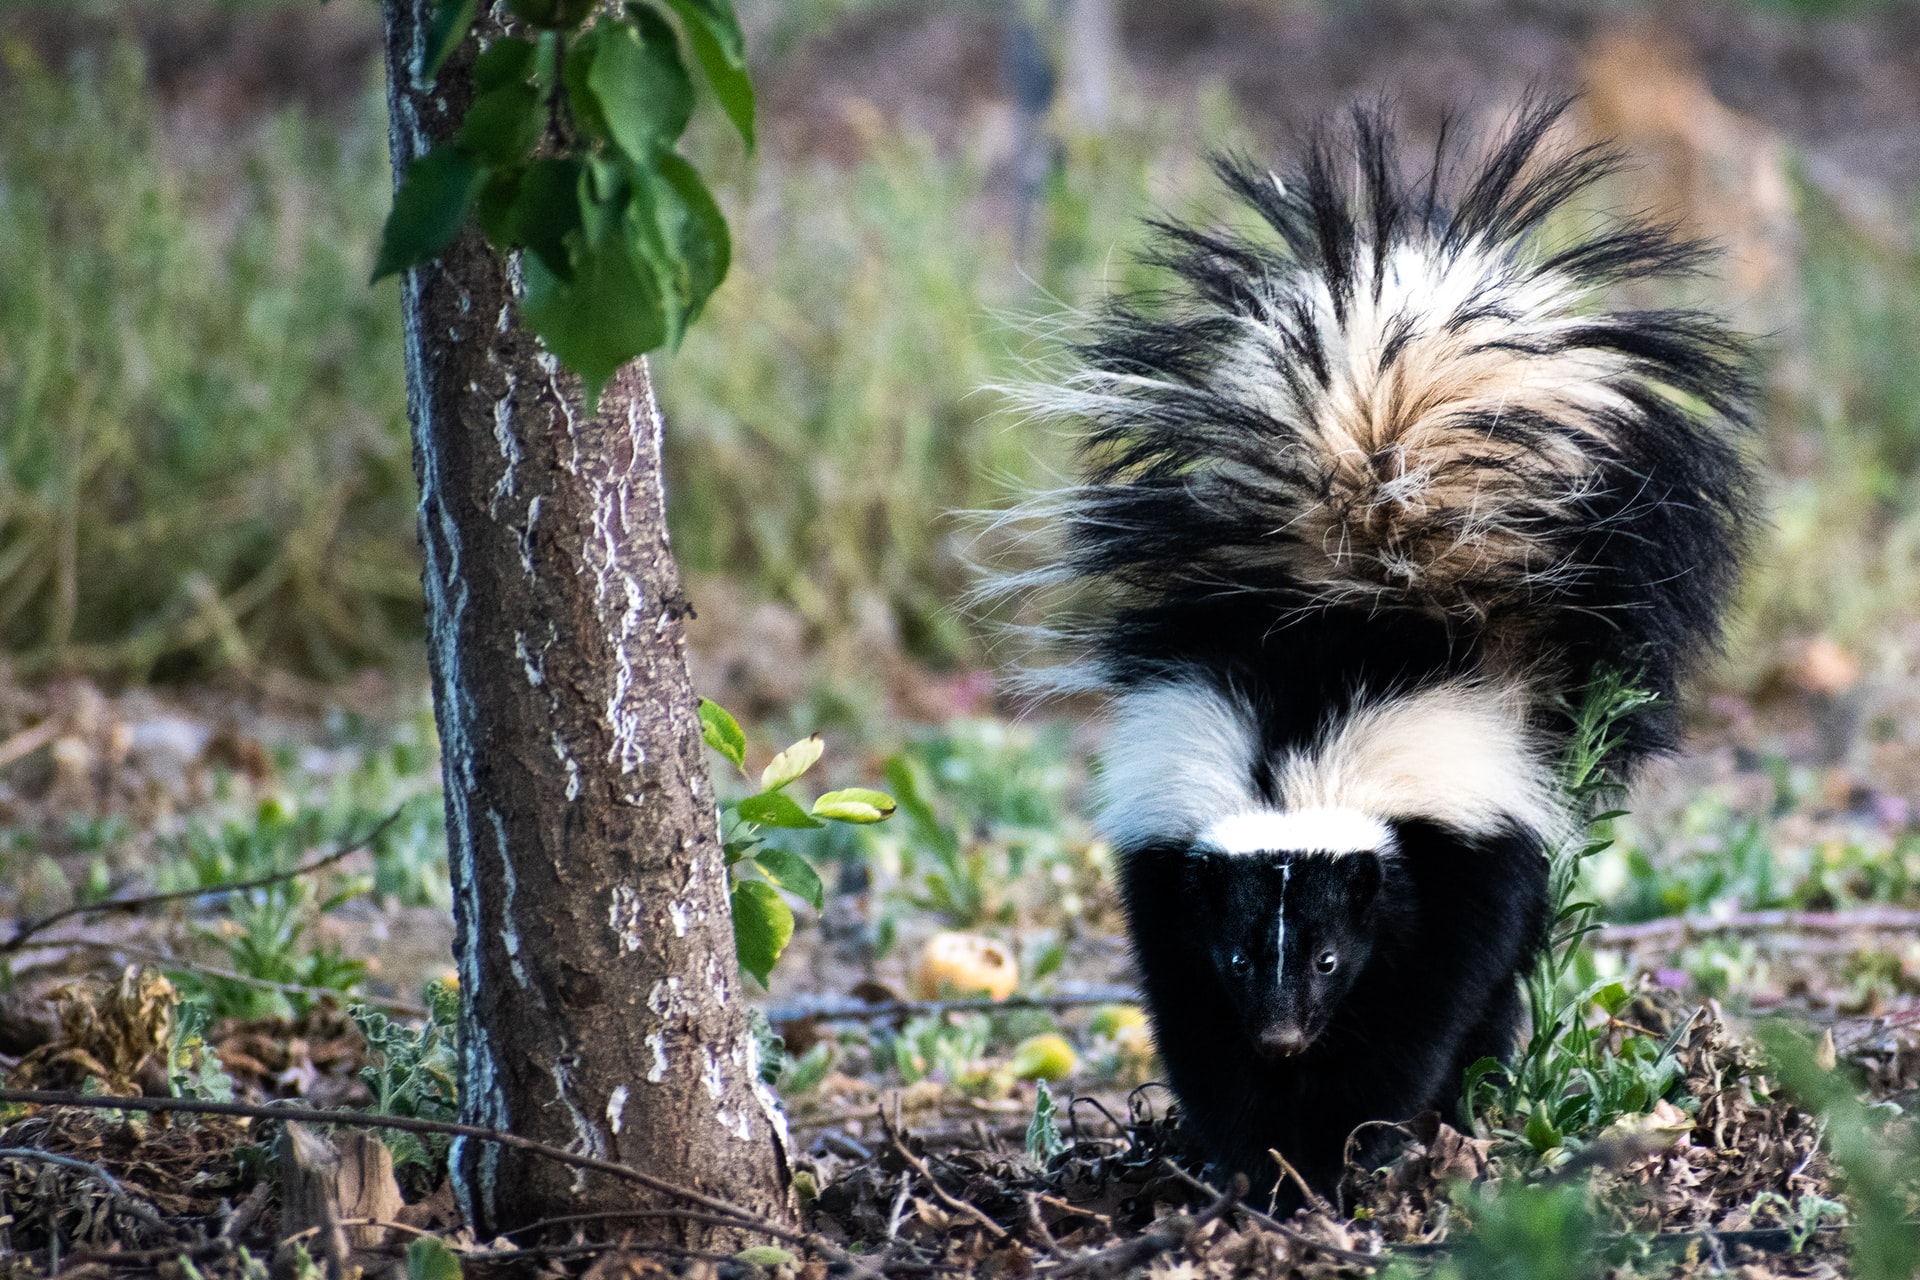 skunk walking near young tree with tail up skunk animal removal and control